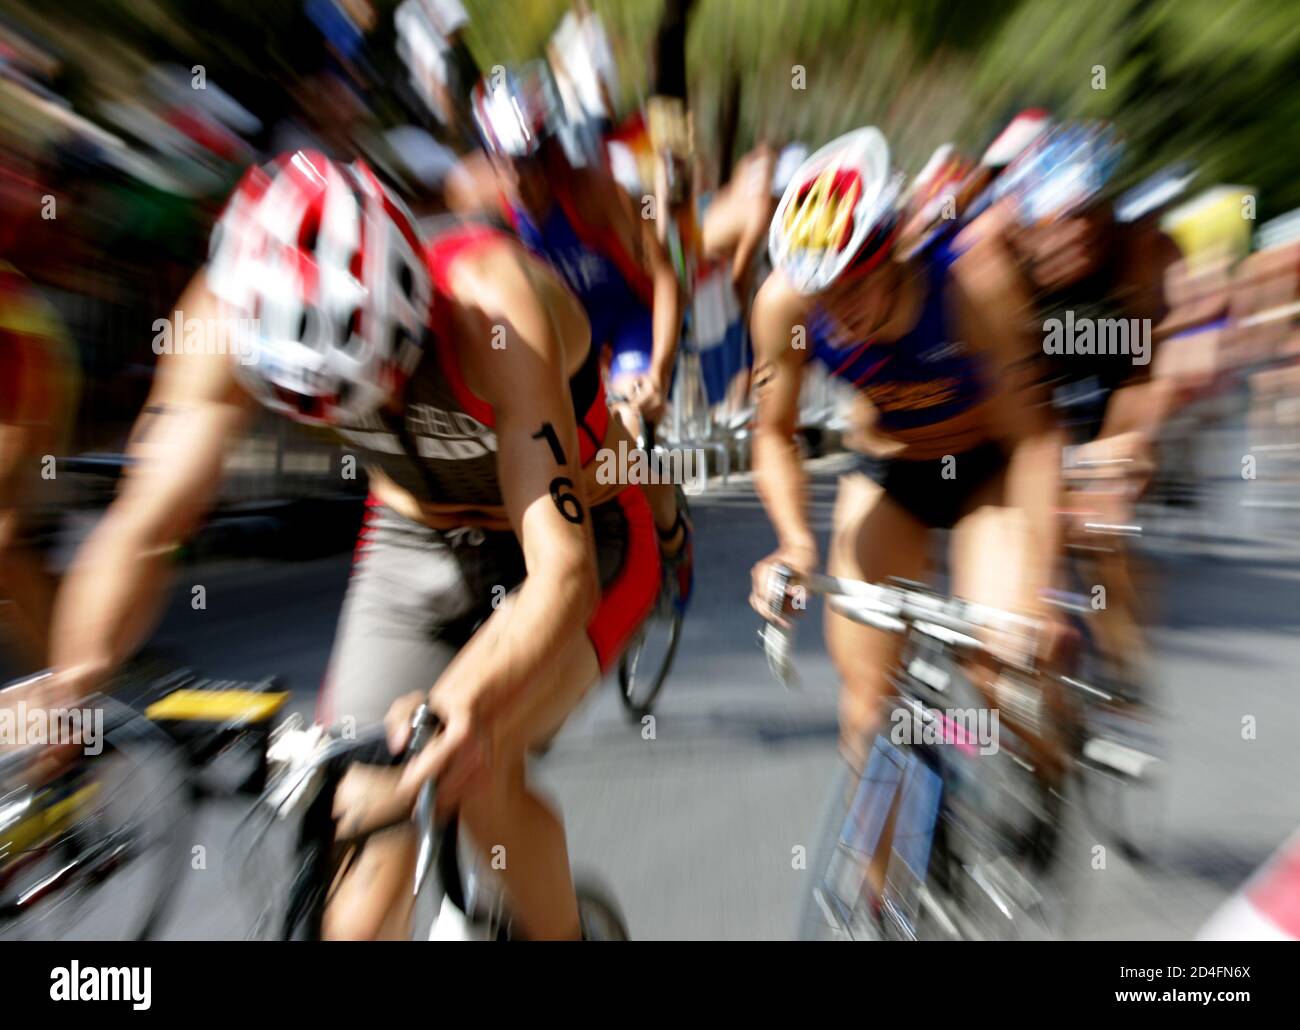 Competitors ride bikes during the men's triathlon event at the Athens 2004 Olympic Games, August 26, 2004. Hamish Carter of New Zealand won the men's triathlon gold medal at the Olympics on Thursday ahead of compatriot Bevan Docherty who took the silver and Sven Riederer of Switzerland the bronze. REUTERS/Kim Kyung-Hoon  KKH/DL Stock Photo